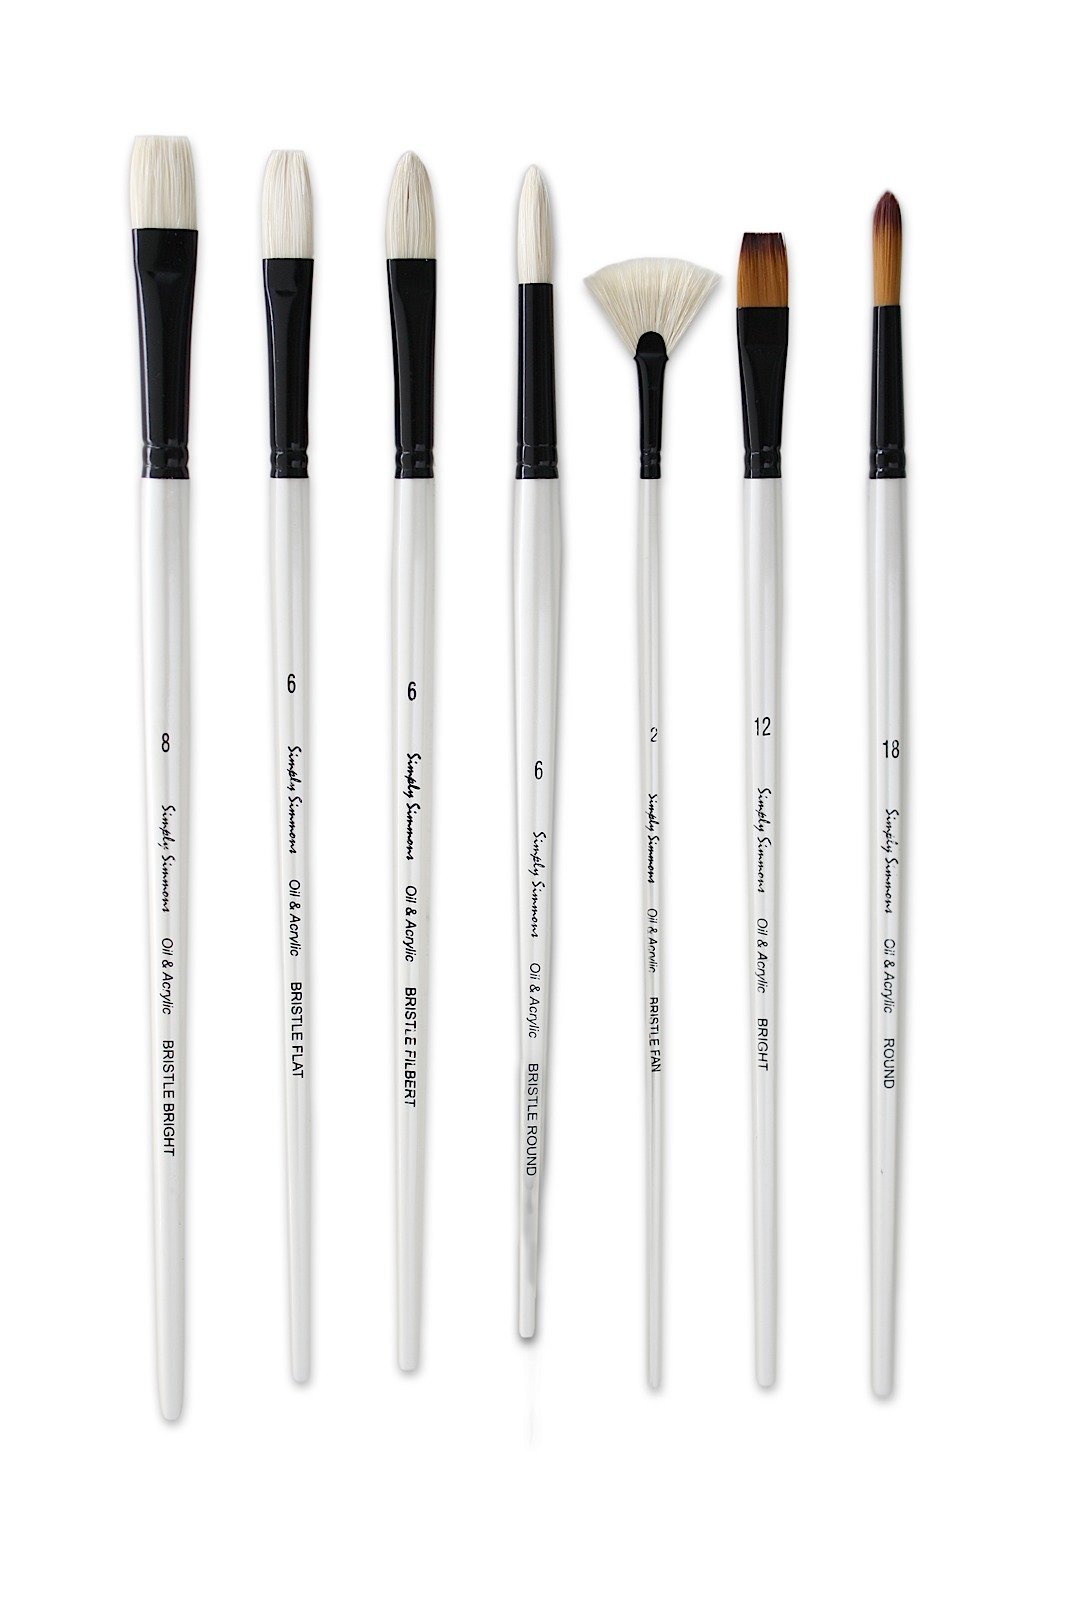 Daler-Rowney - Simply Simmons Long Handle Brushes